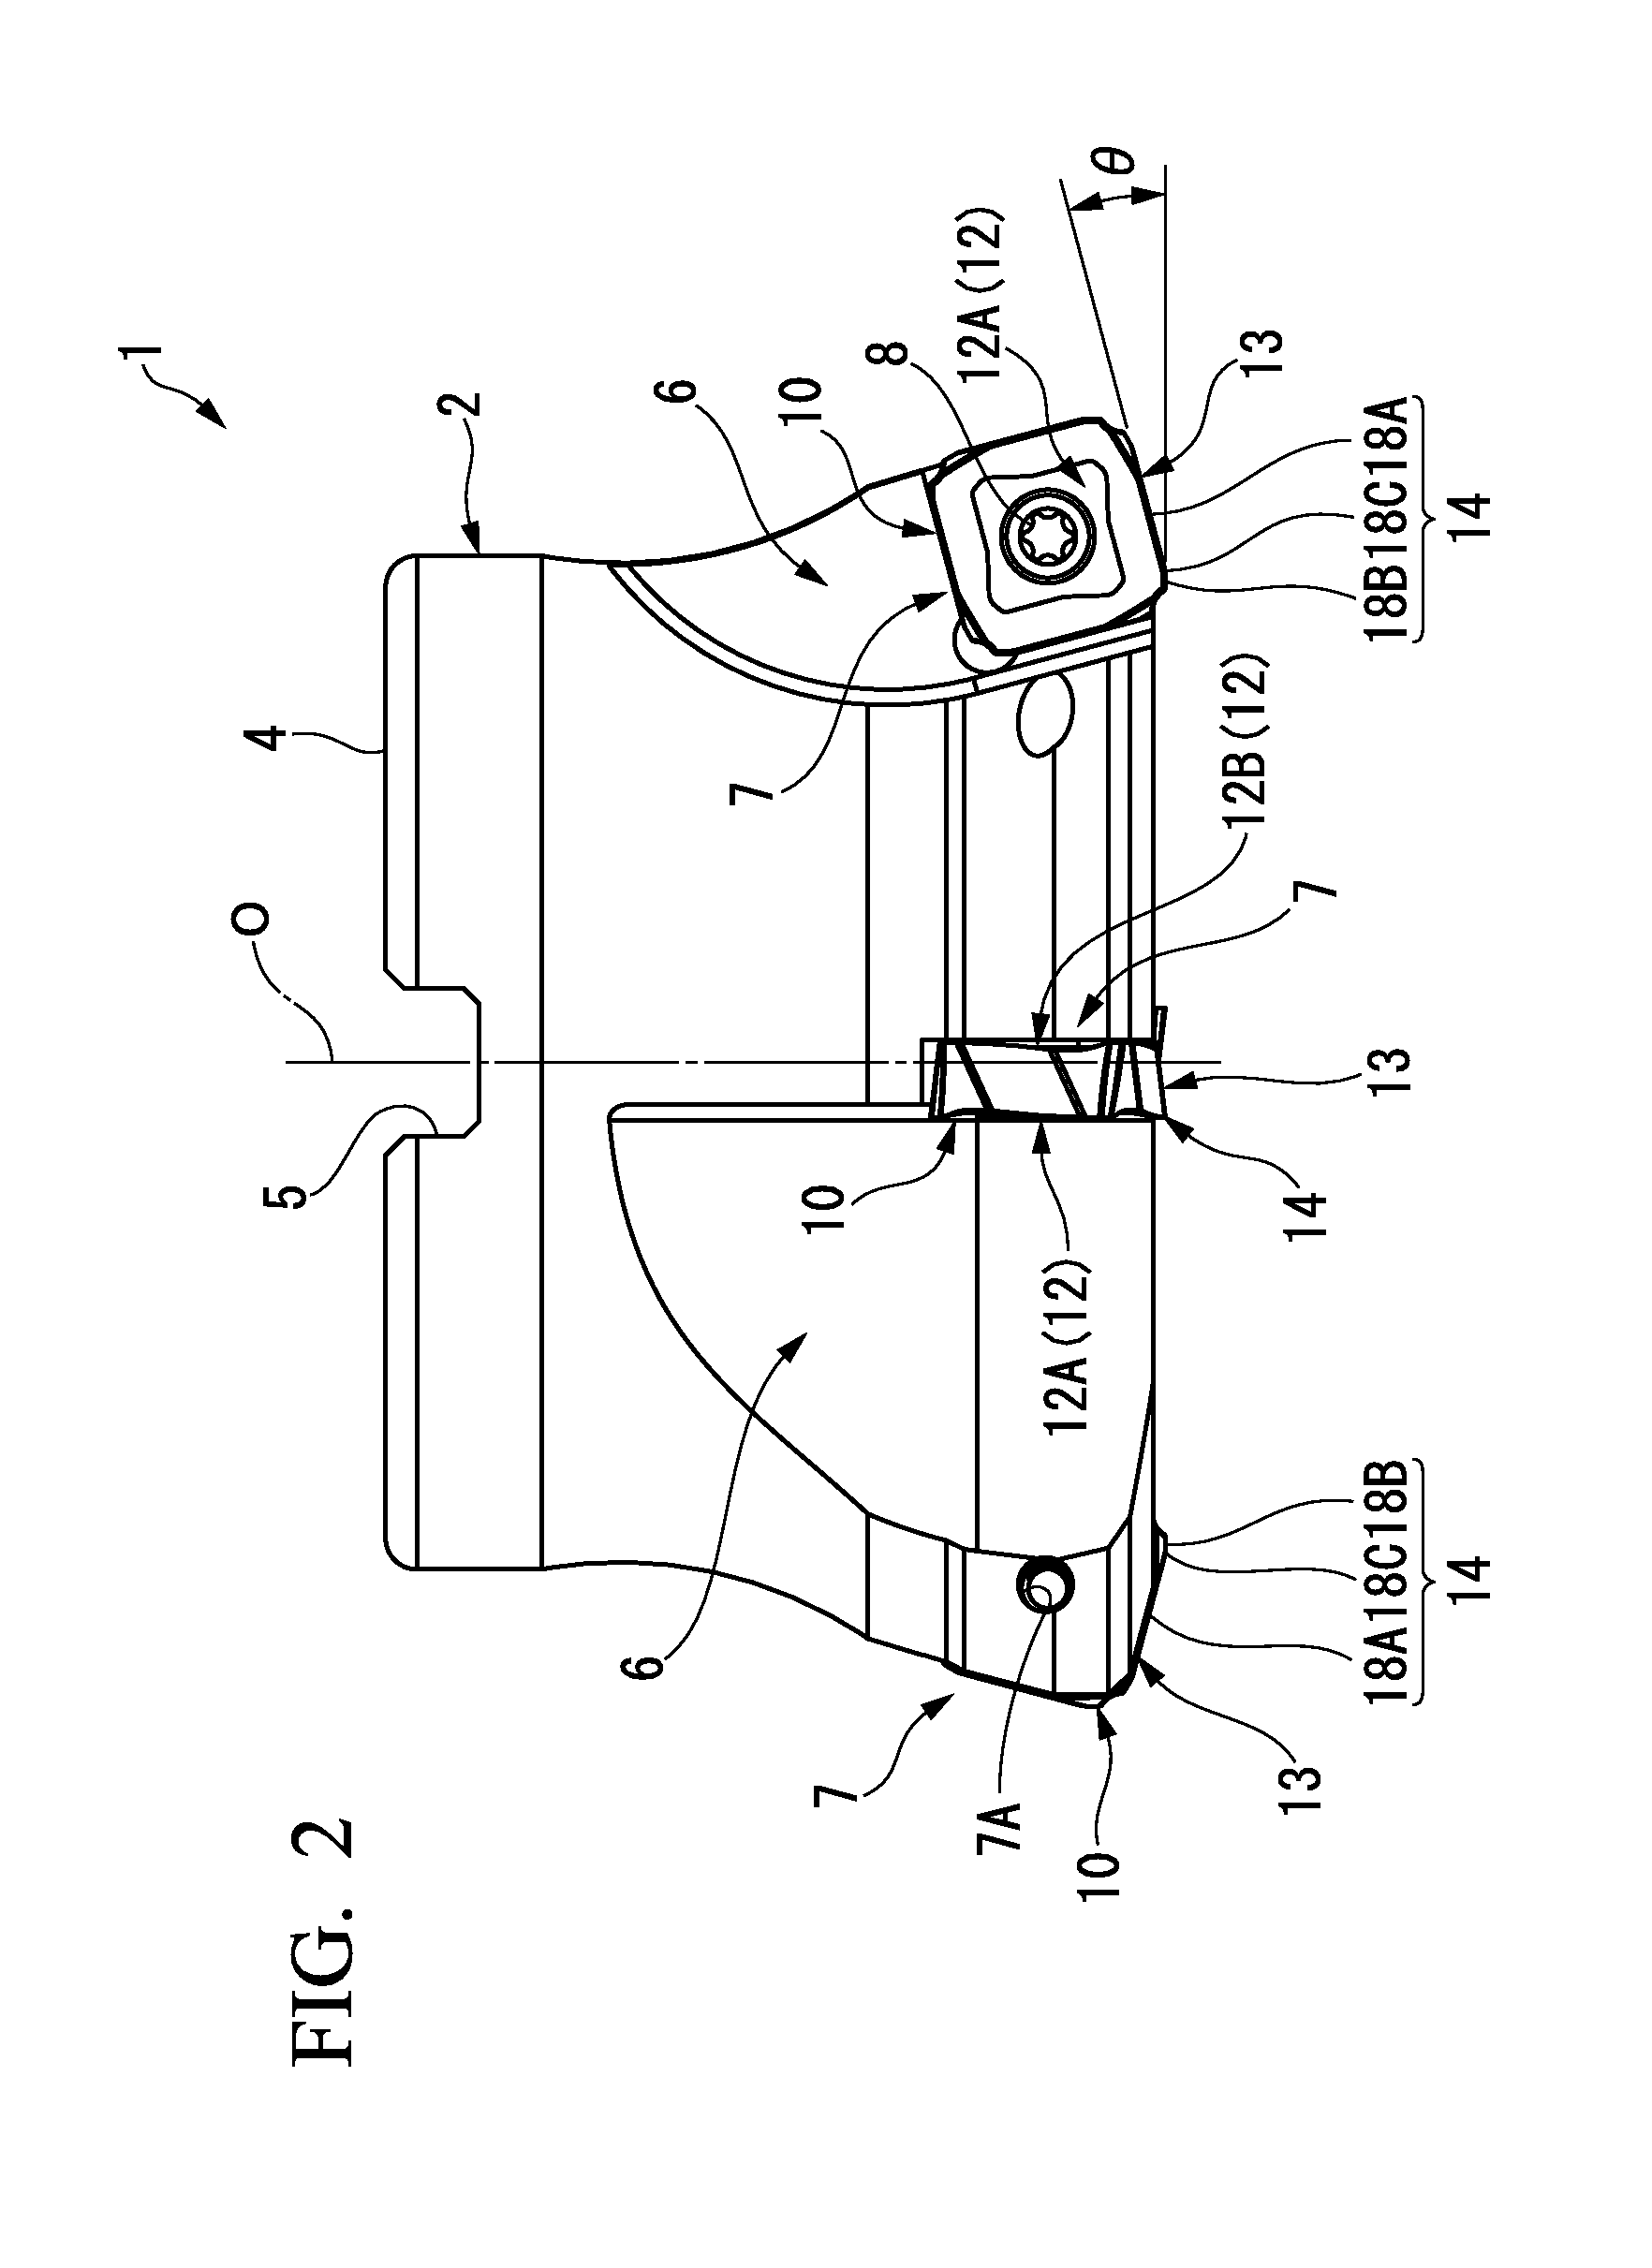 Cutting insert and replaceable insert-type rotating tool